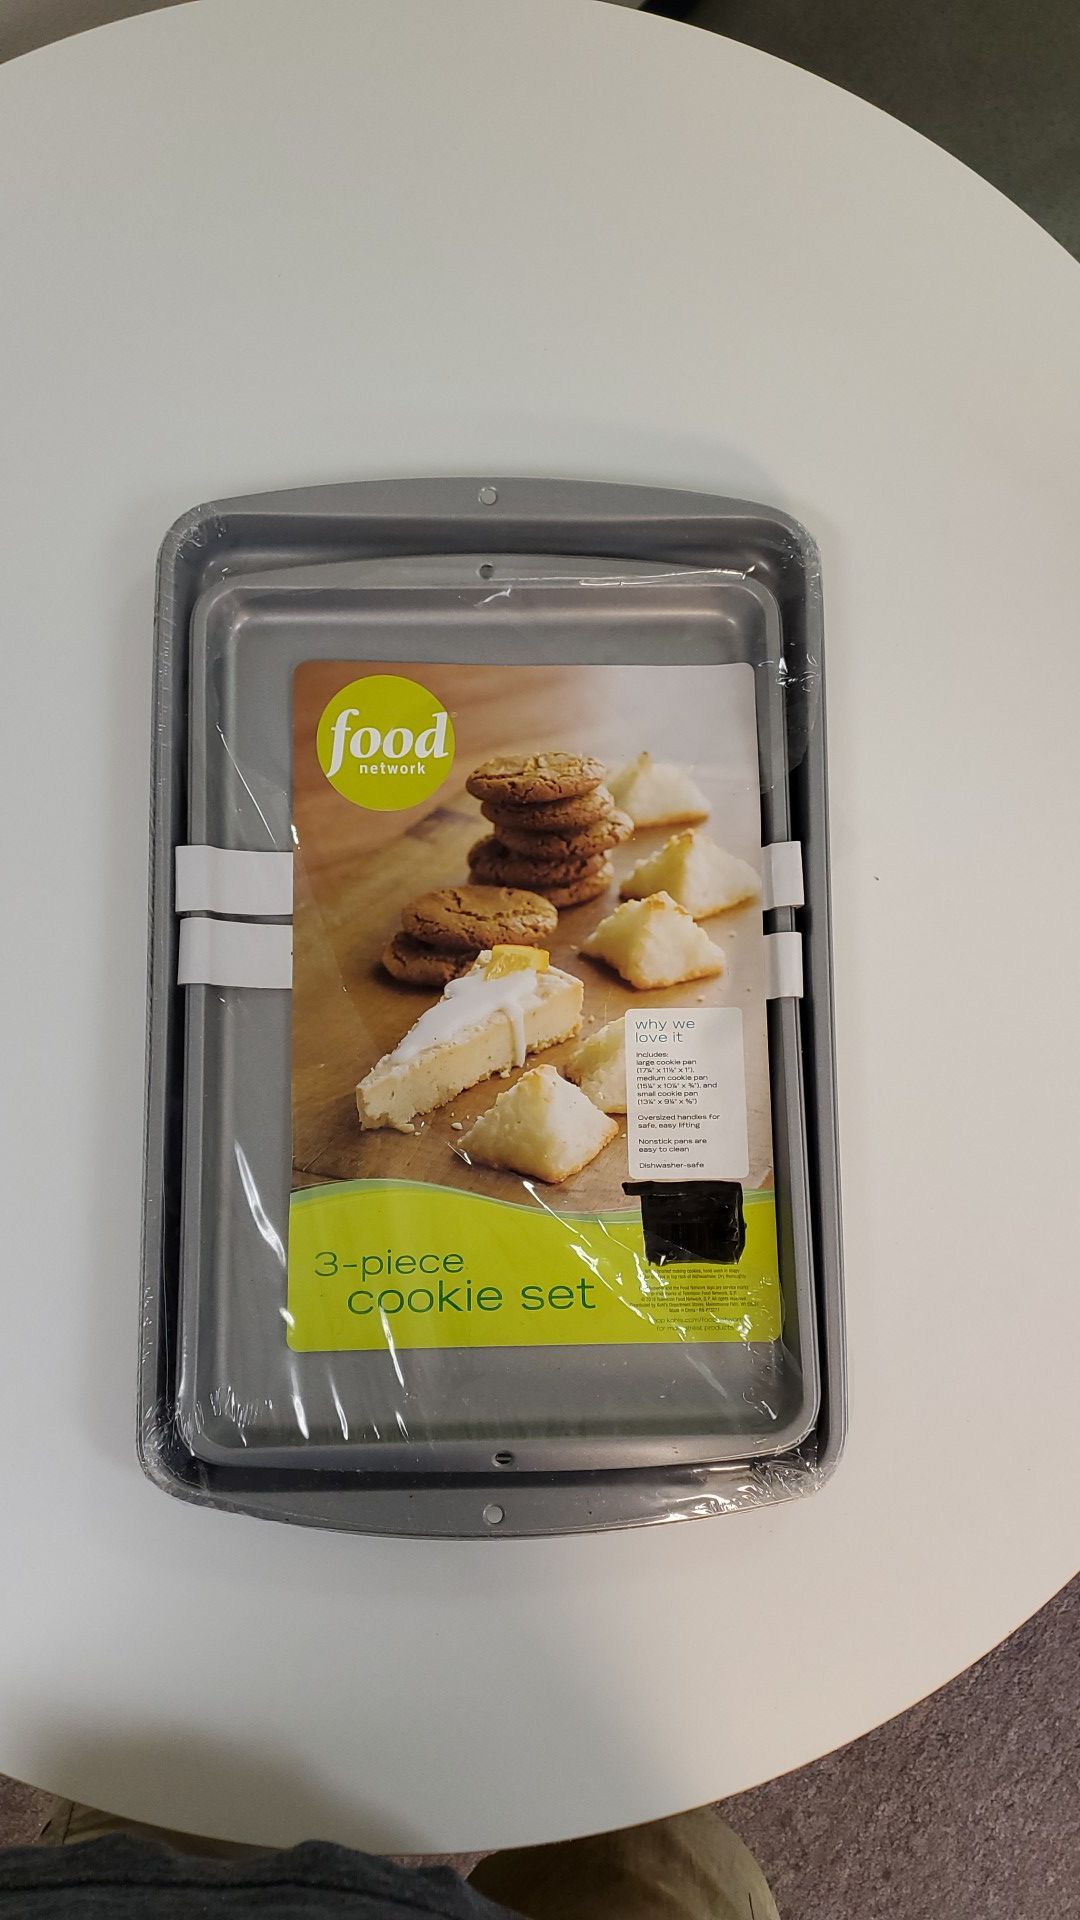 ( 3 ) NON- STICK COOKIE BACKING PANS, with ( 1 ) BAKERS SECRET NON- STICK COOLING RACK.